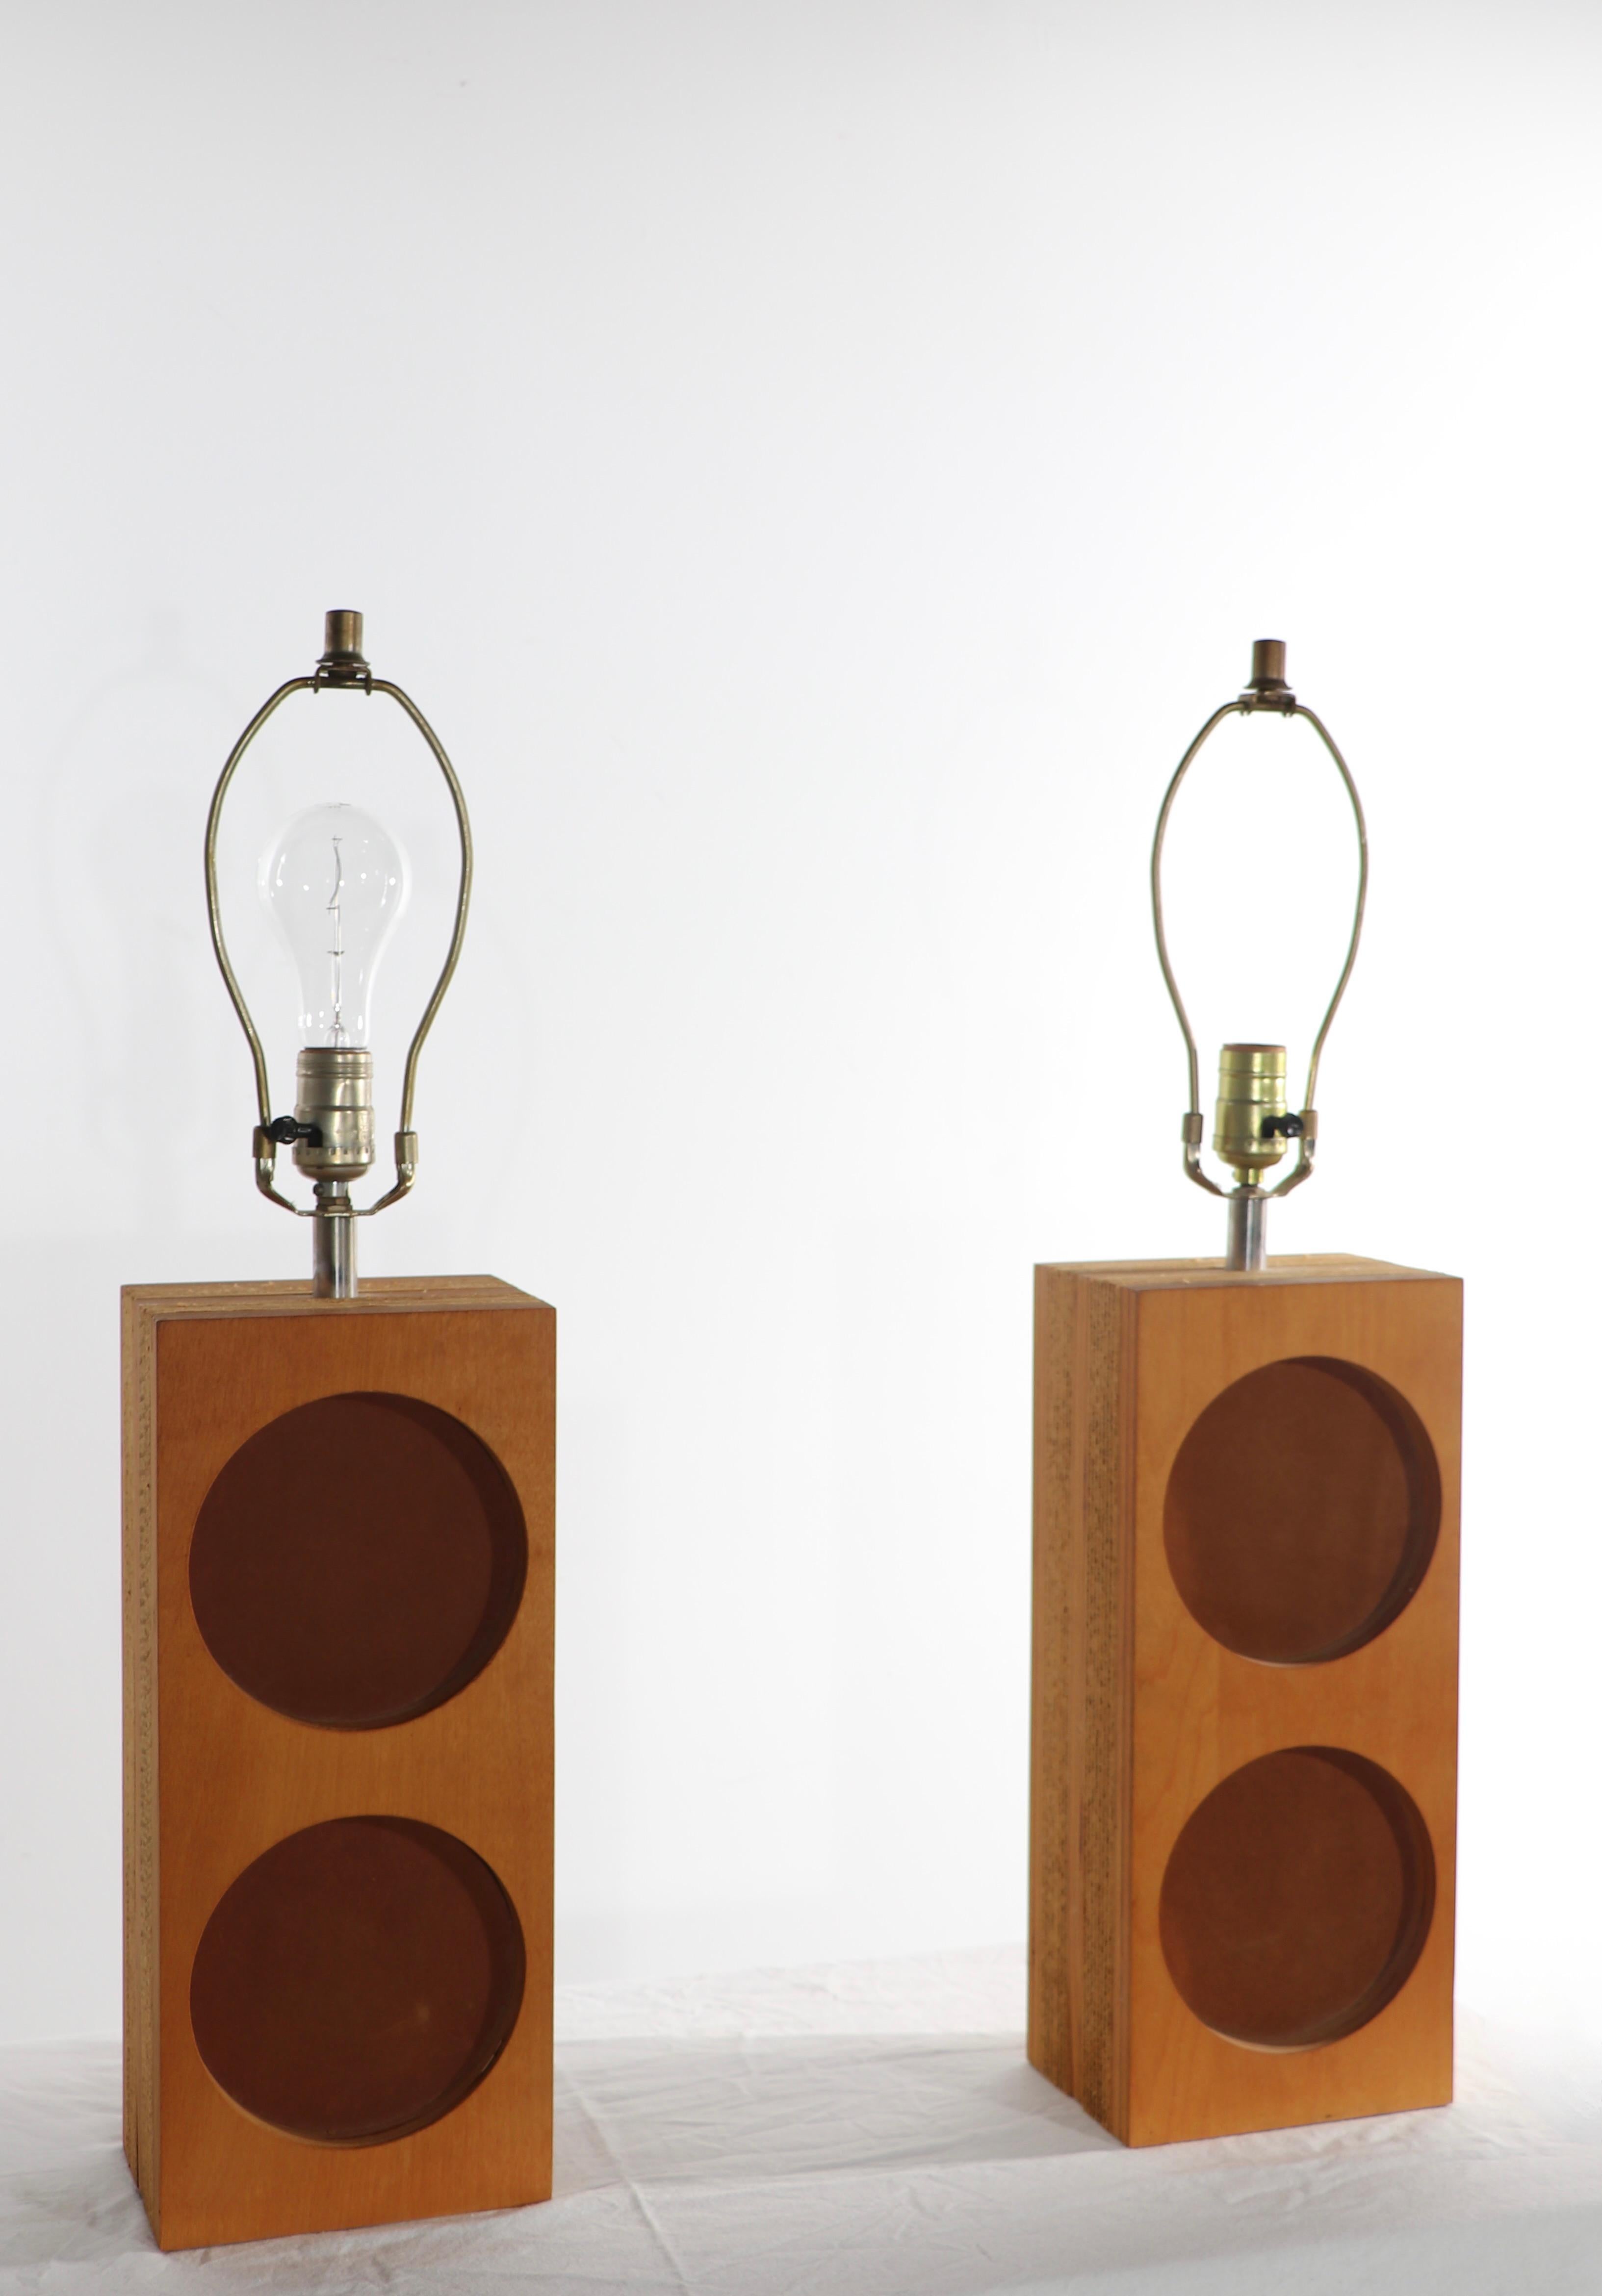 Extraordinary pair of architectural lamps, attributed tonGregory Van Pelt, in the style of Frank Gehry . The lamps features a layered cardboard and plywood rectangular body with circular cut out disks lined with tan ultra suede. Both are in very